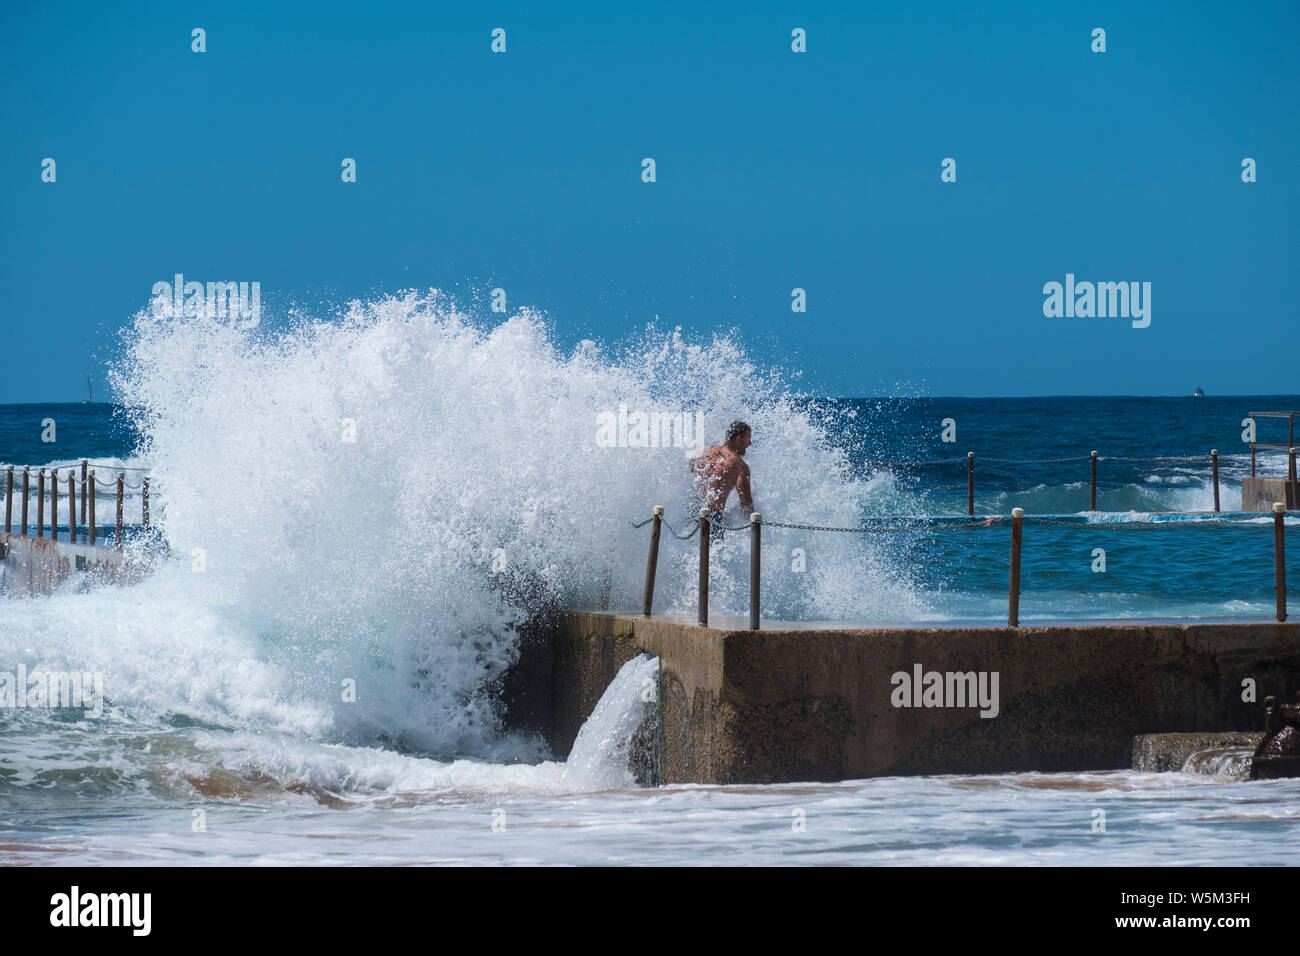 A wave crashes onto a wall of an ocean pool. Bathers enjoys the thrill of the spray. Stock Photo